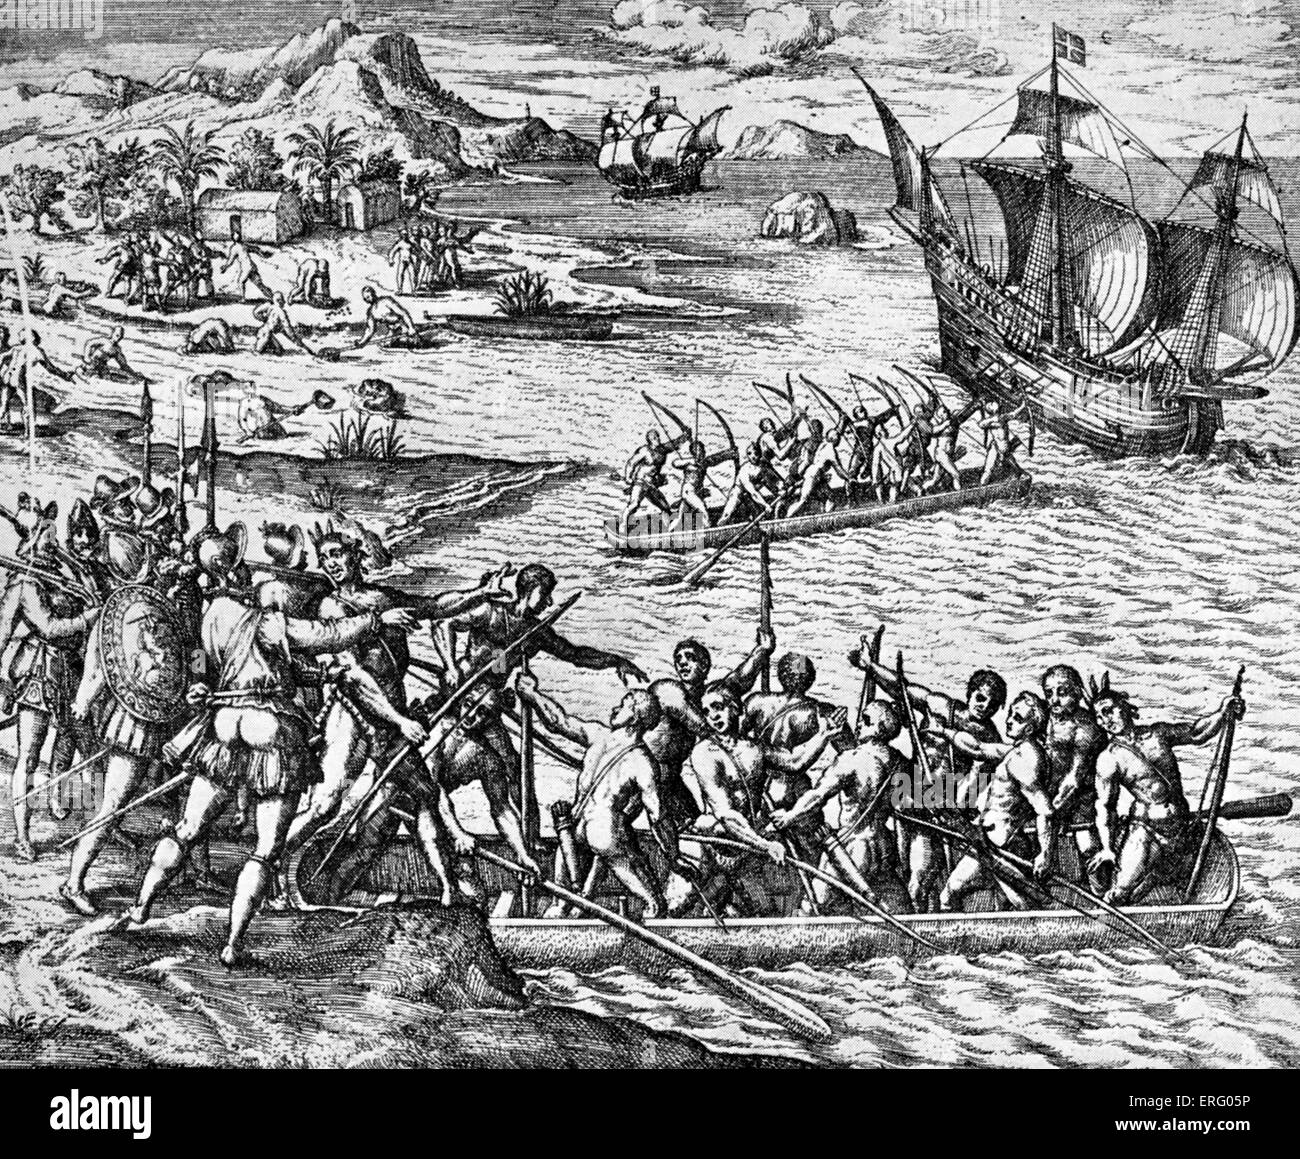 'An attack by Indians', La Herradura, engraving. The Spanish and Indians attack Sir Francis Drake 's men in the Bay of La Stock Photo